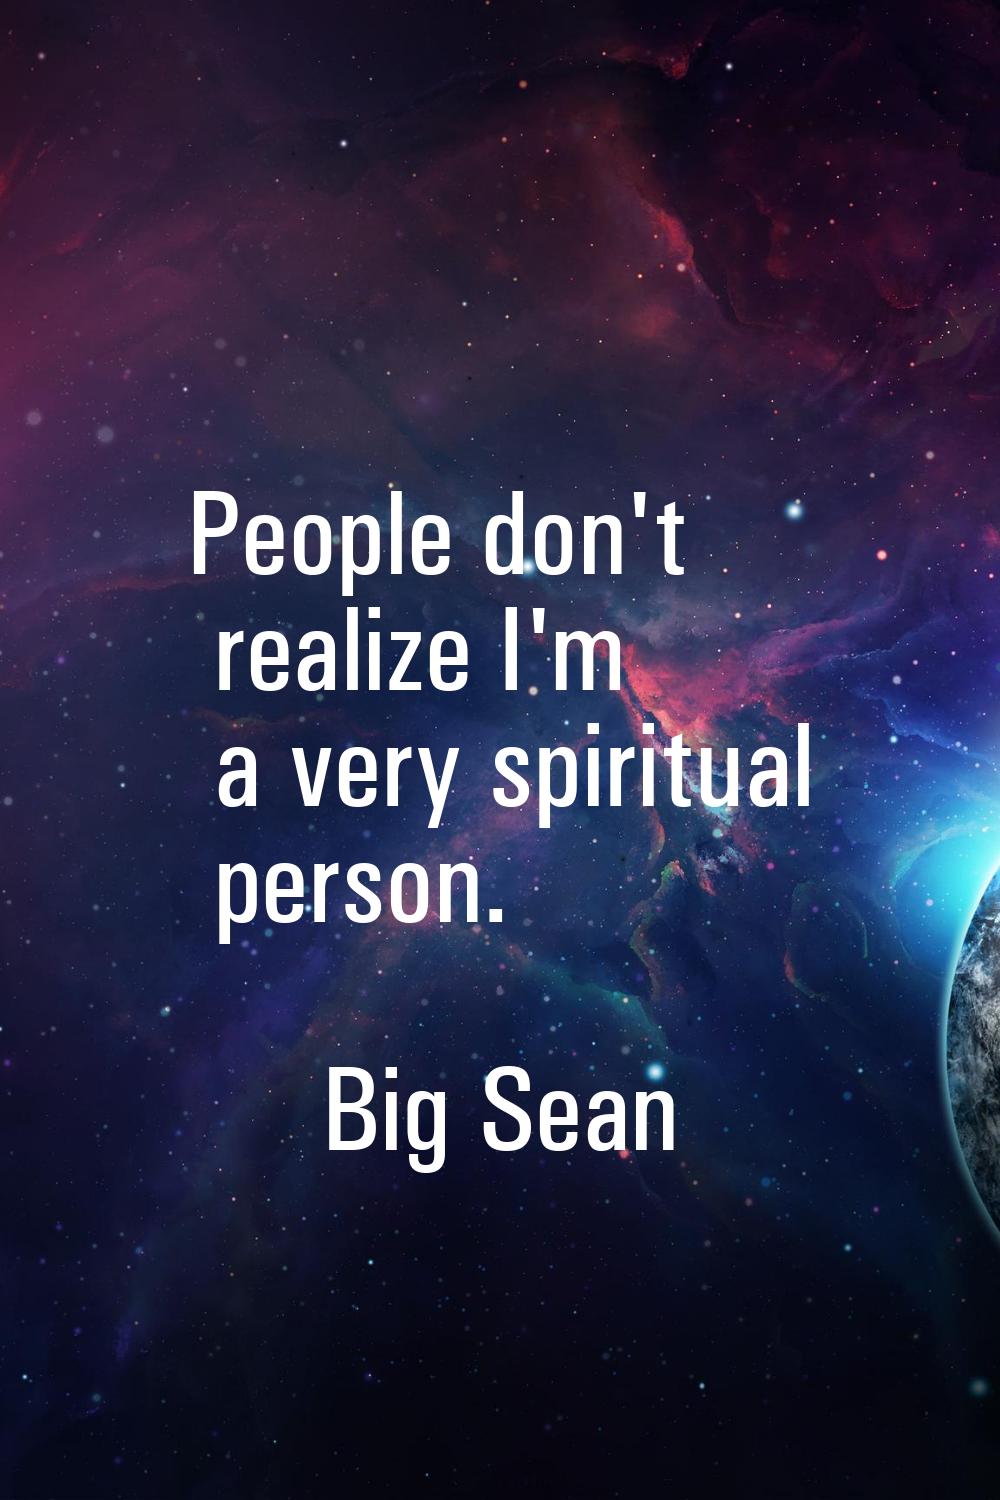 People don't realize I'm a very spiritual person.